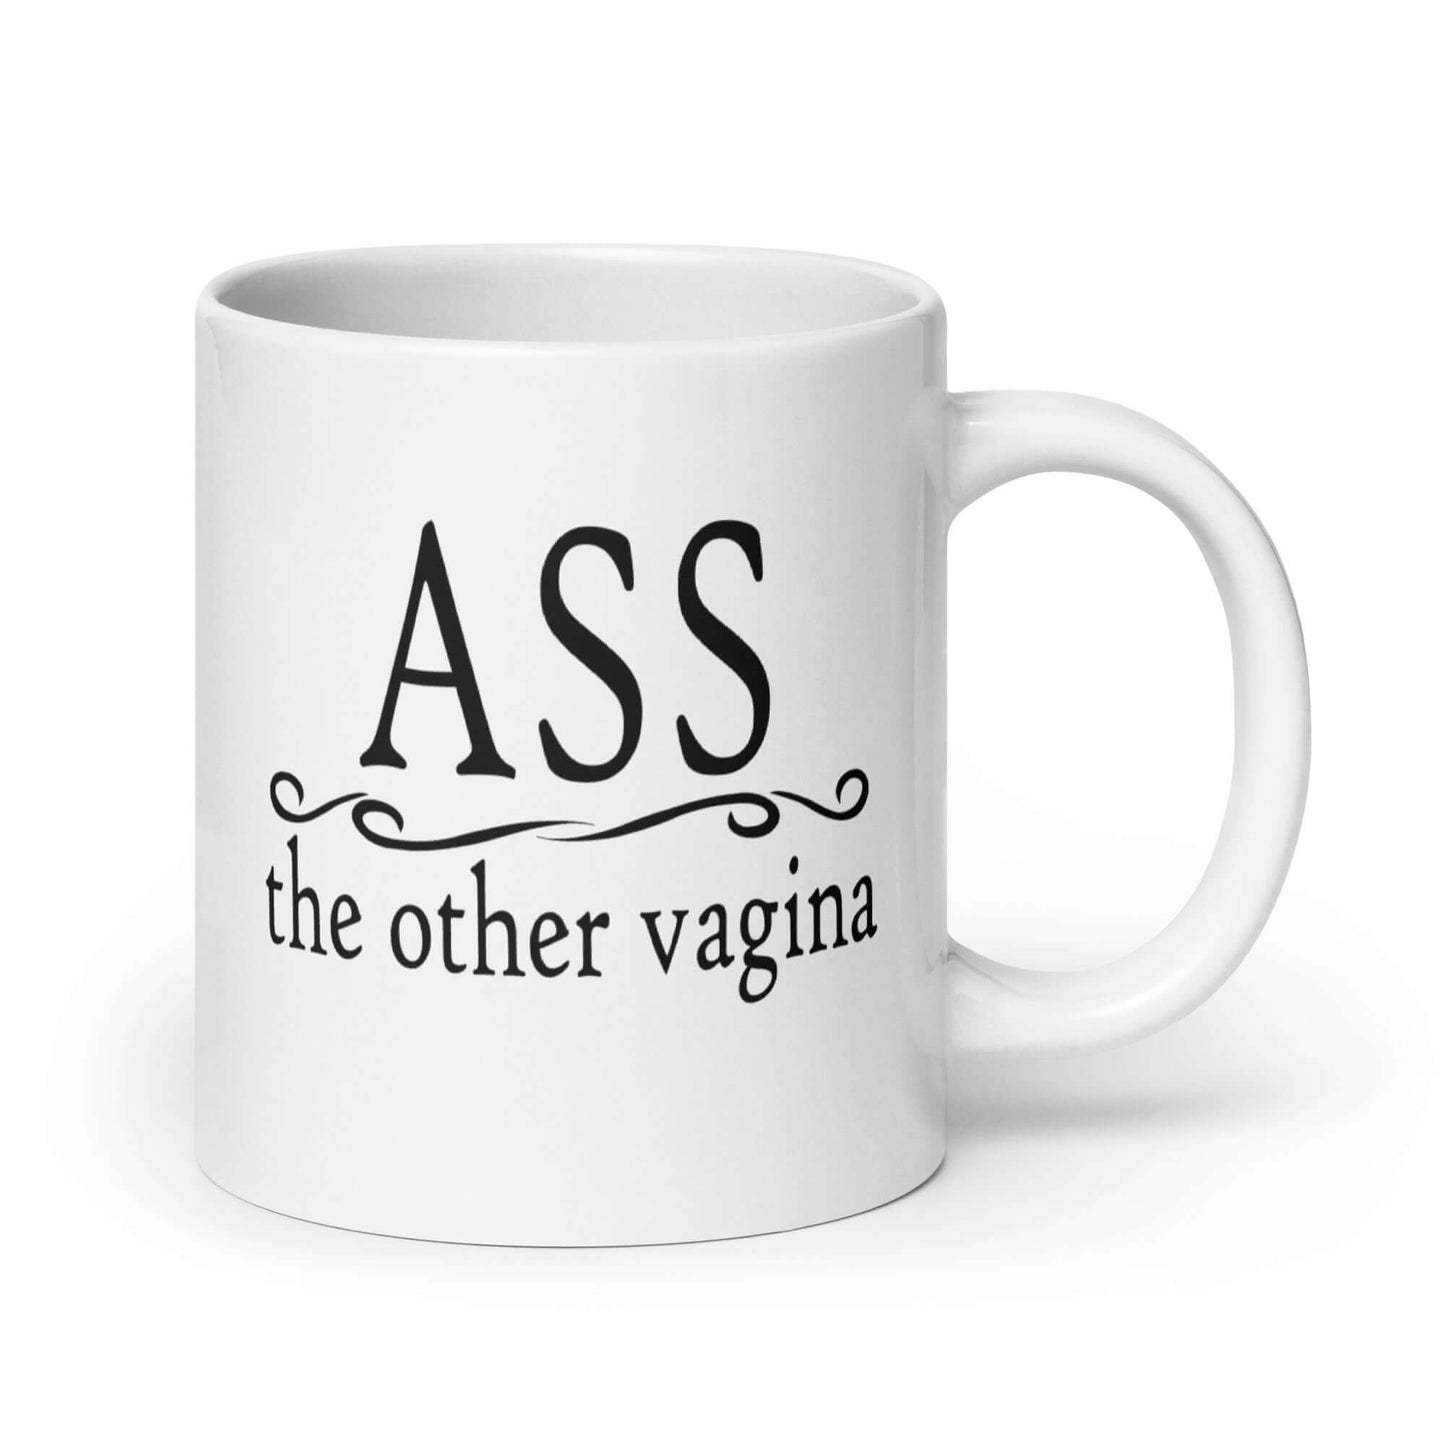 20 ounce white ceramic coffee mug with the words Ass, the other vagina printed on both sides.